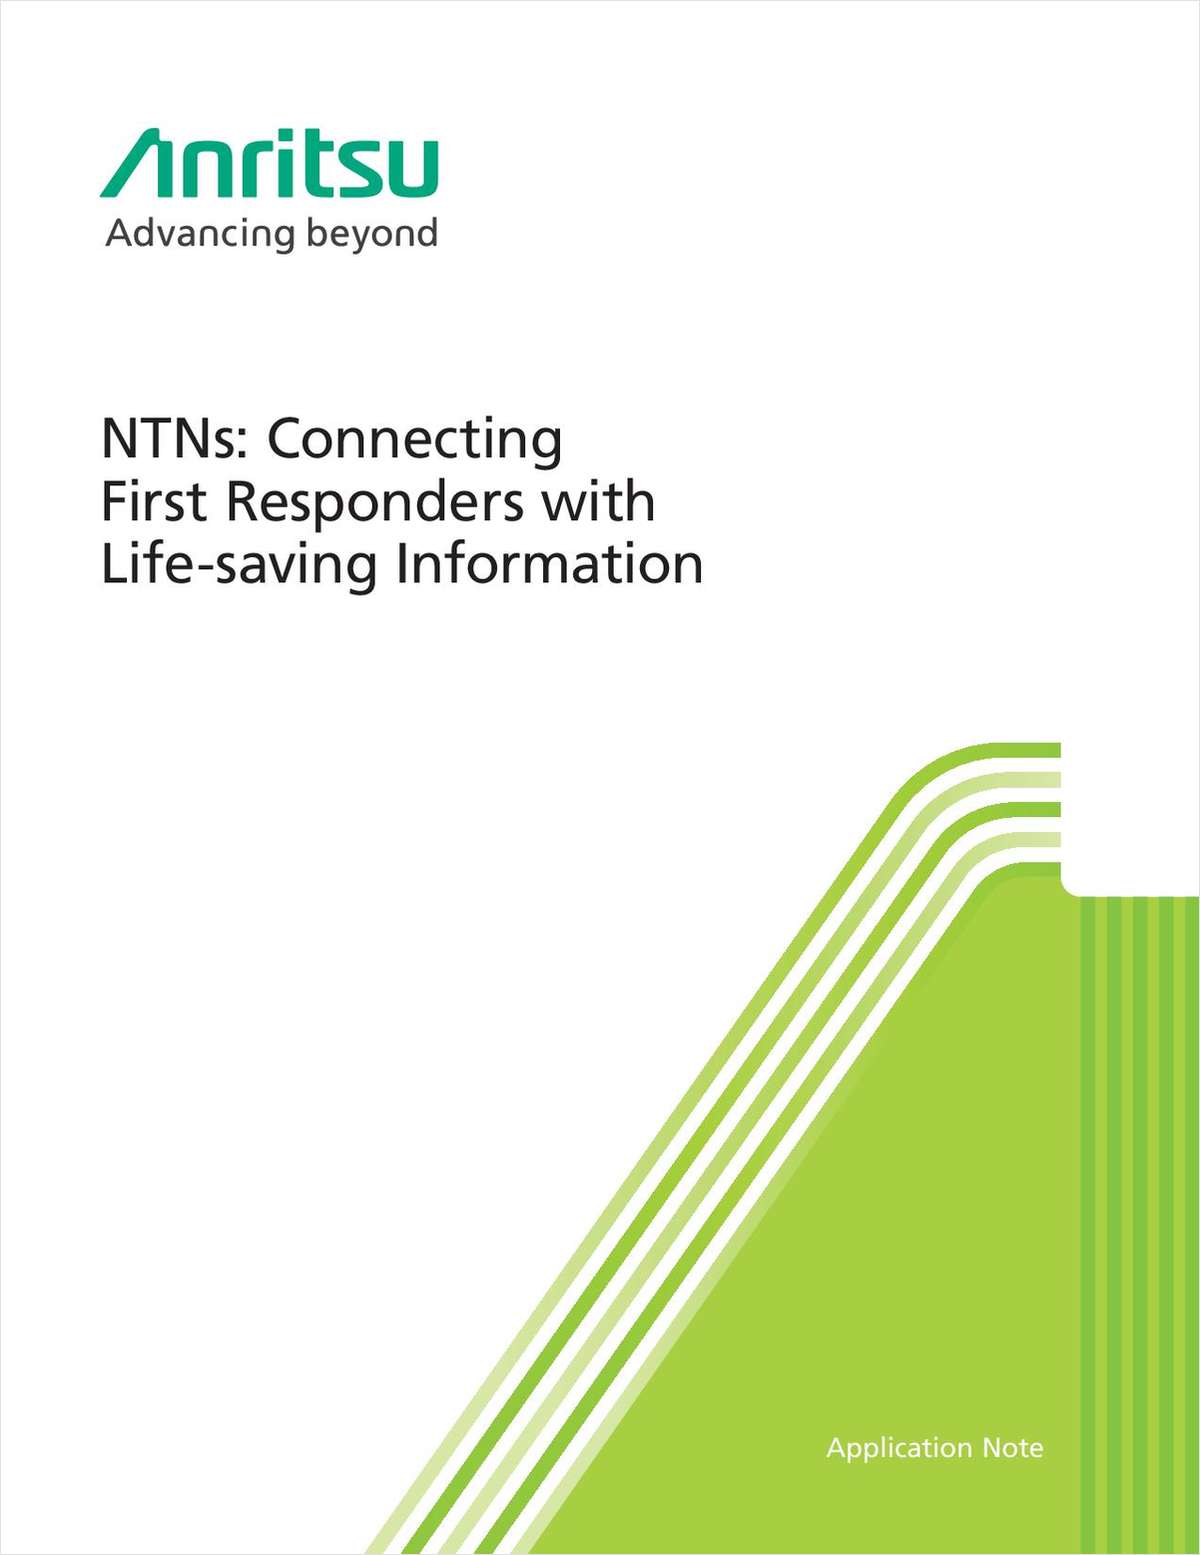 NTNs: Connecting First Responders with Life-saving Information